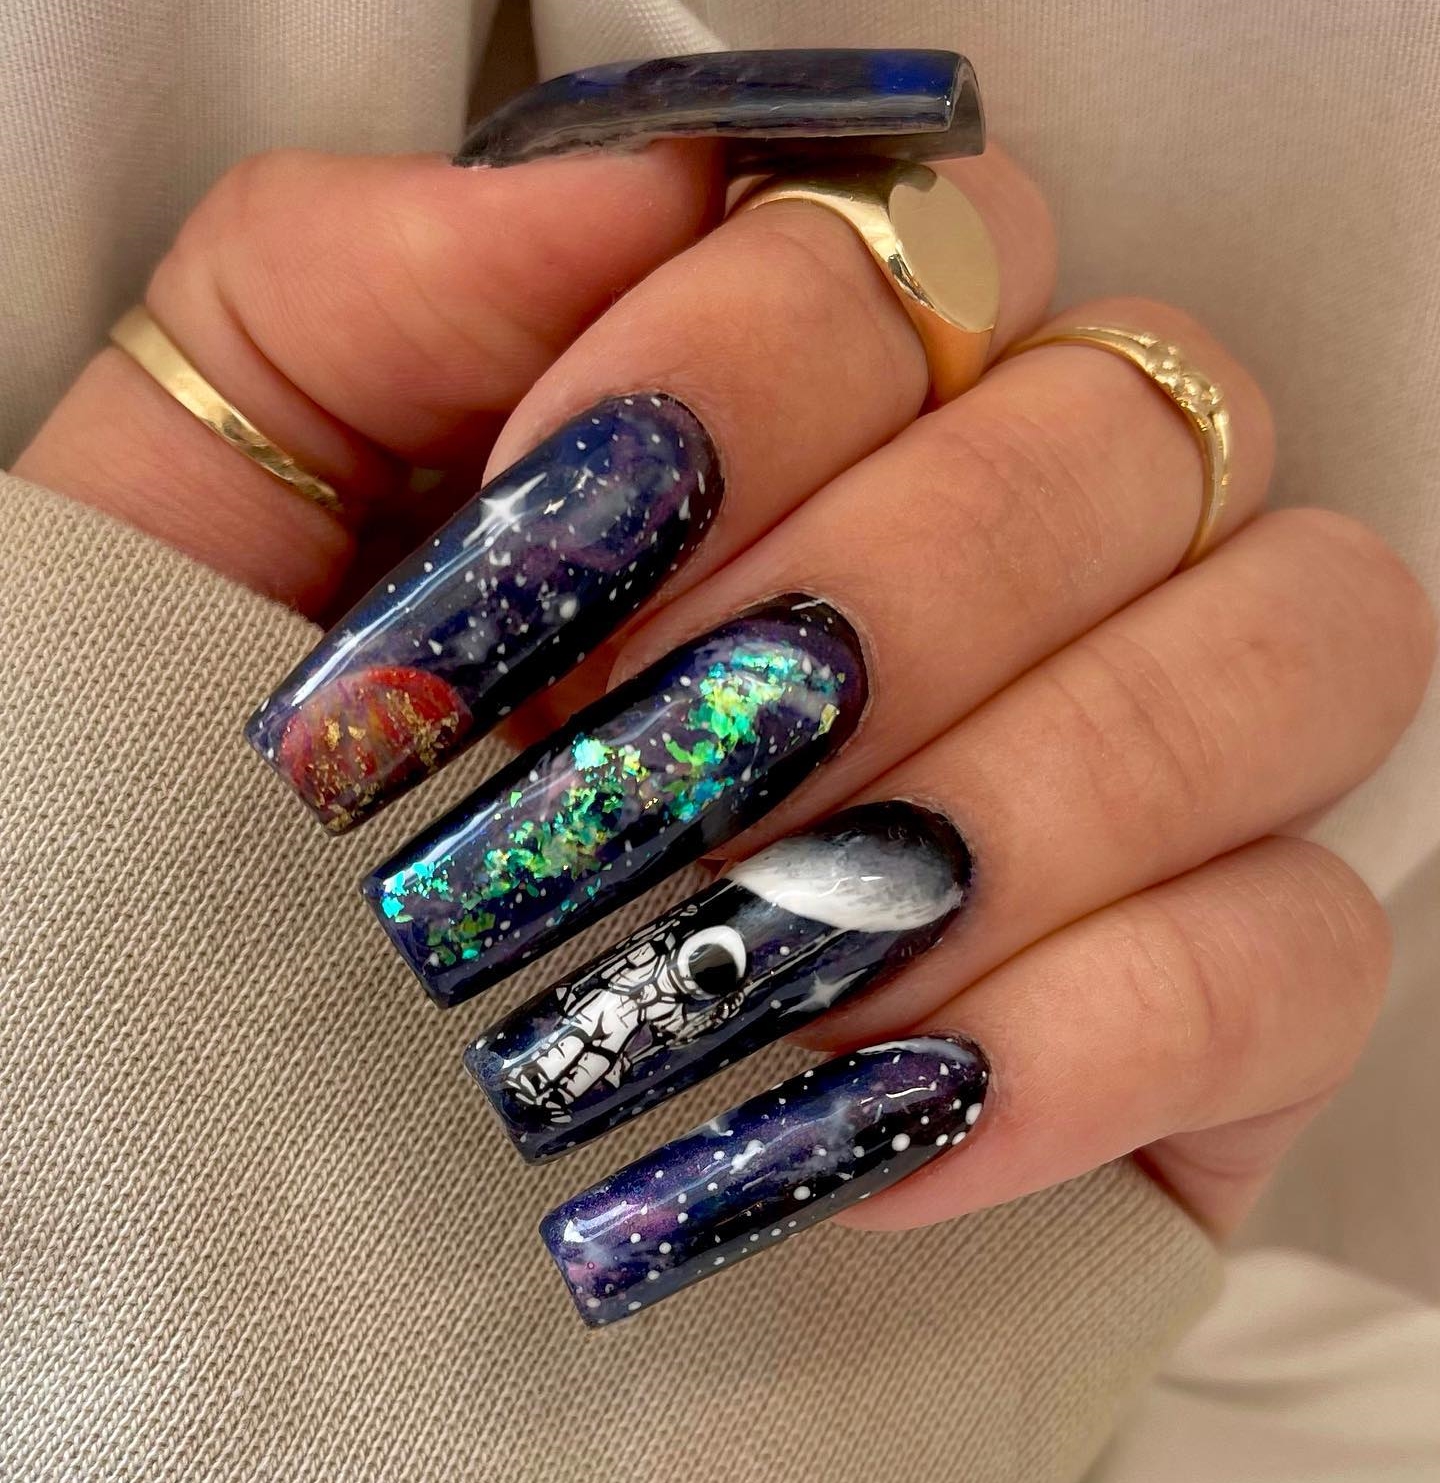 Galactic Glamour: Cosmic Nail Art Takes Nails to a New Frontier